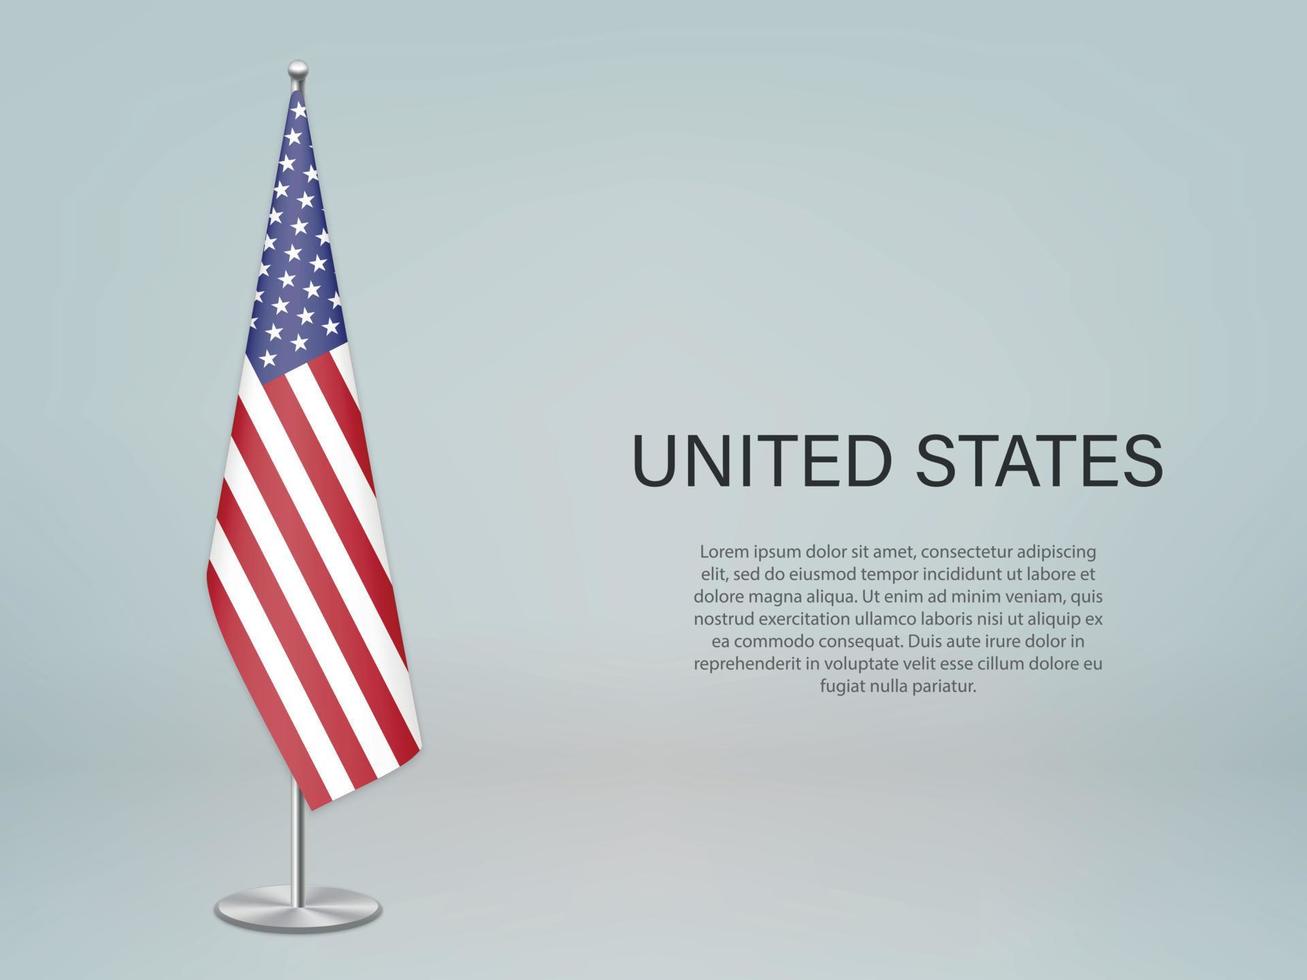 United States hanging flag on stand. Template forconference bann vector